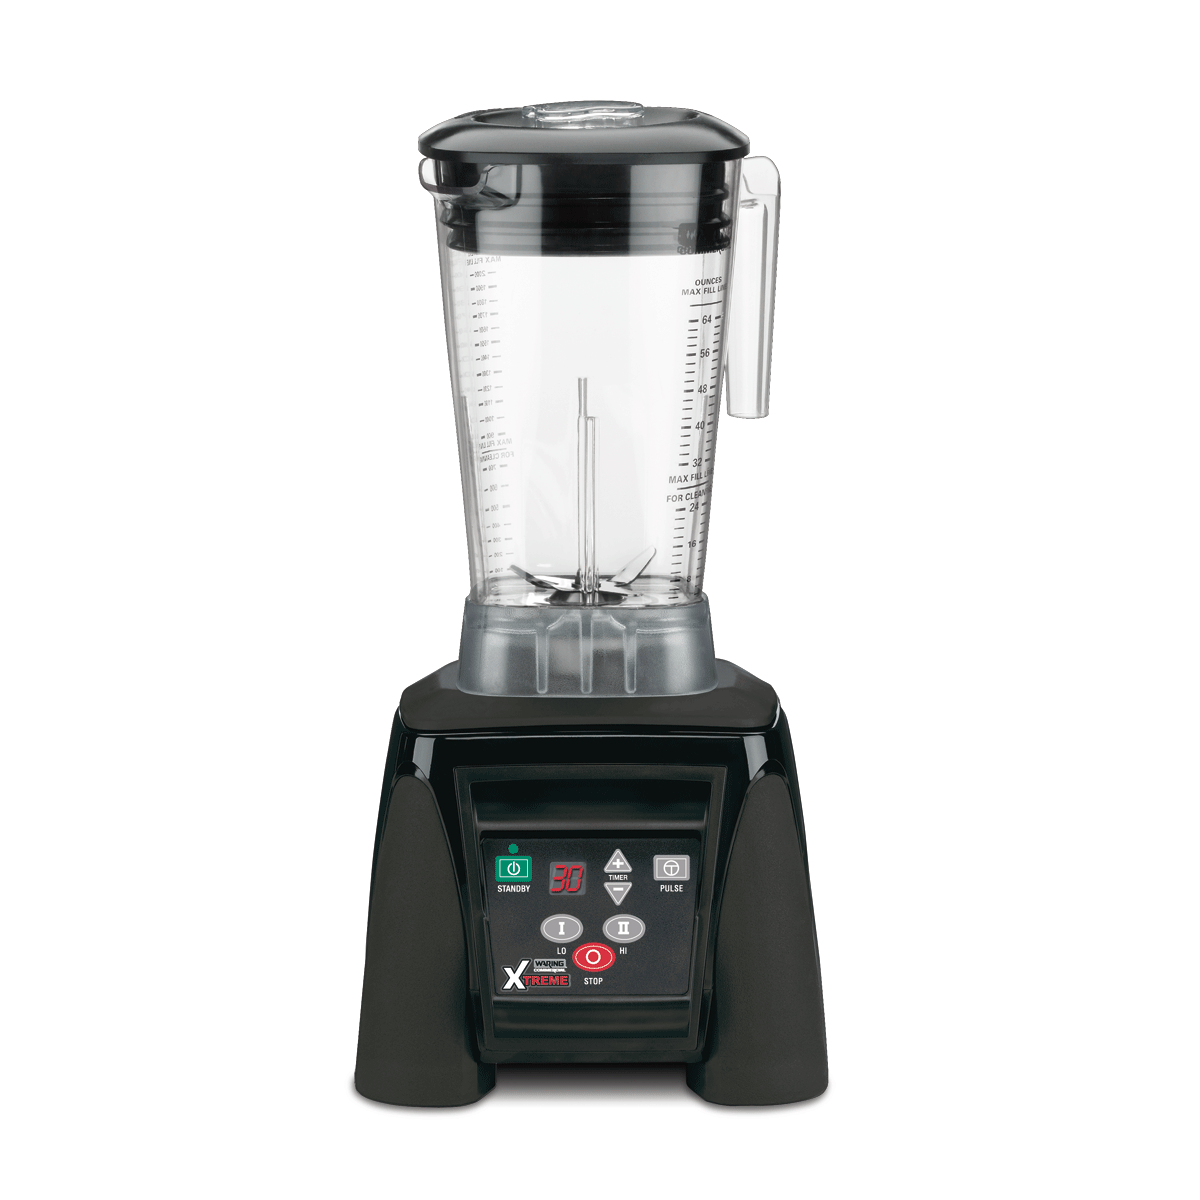 WARING LBC15 4-Liter Laboratory Blender with Stainless Steel